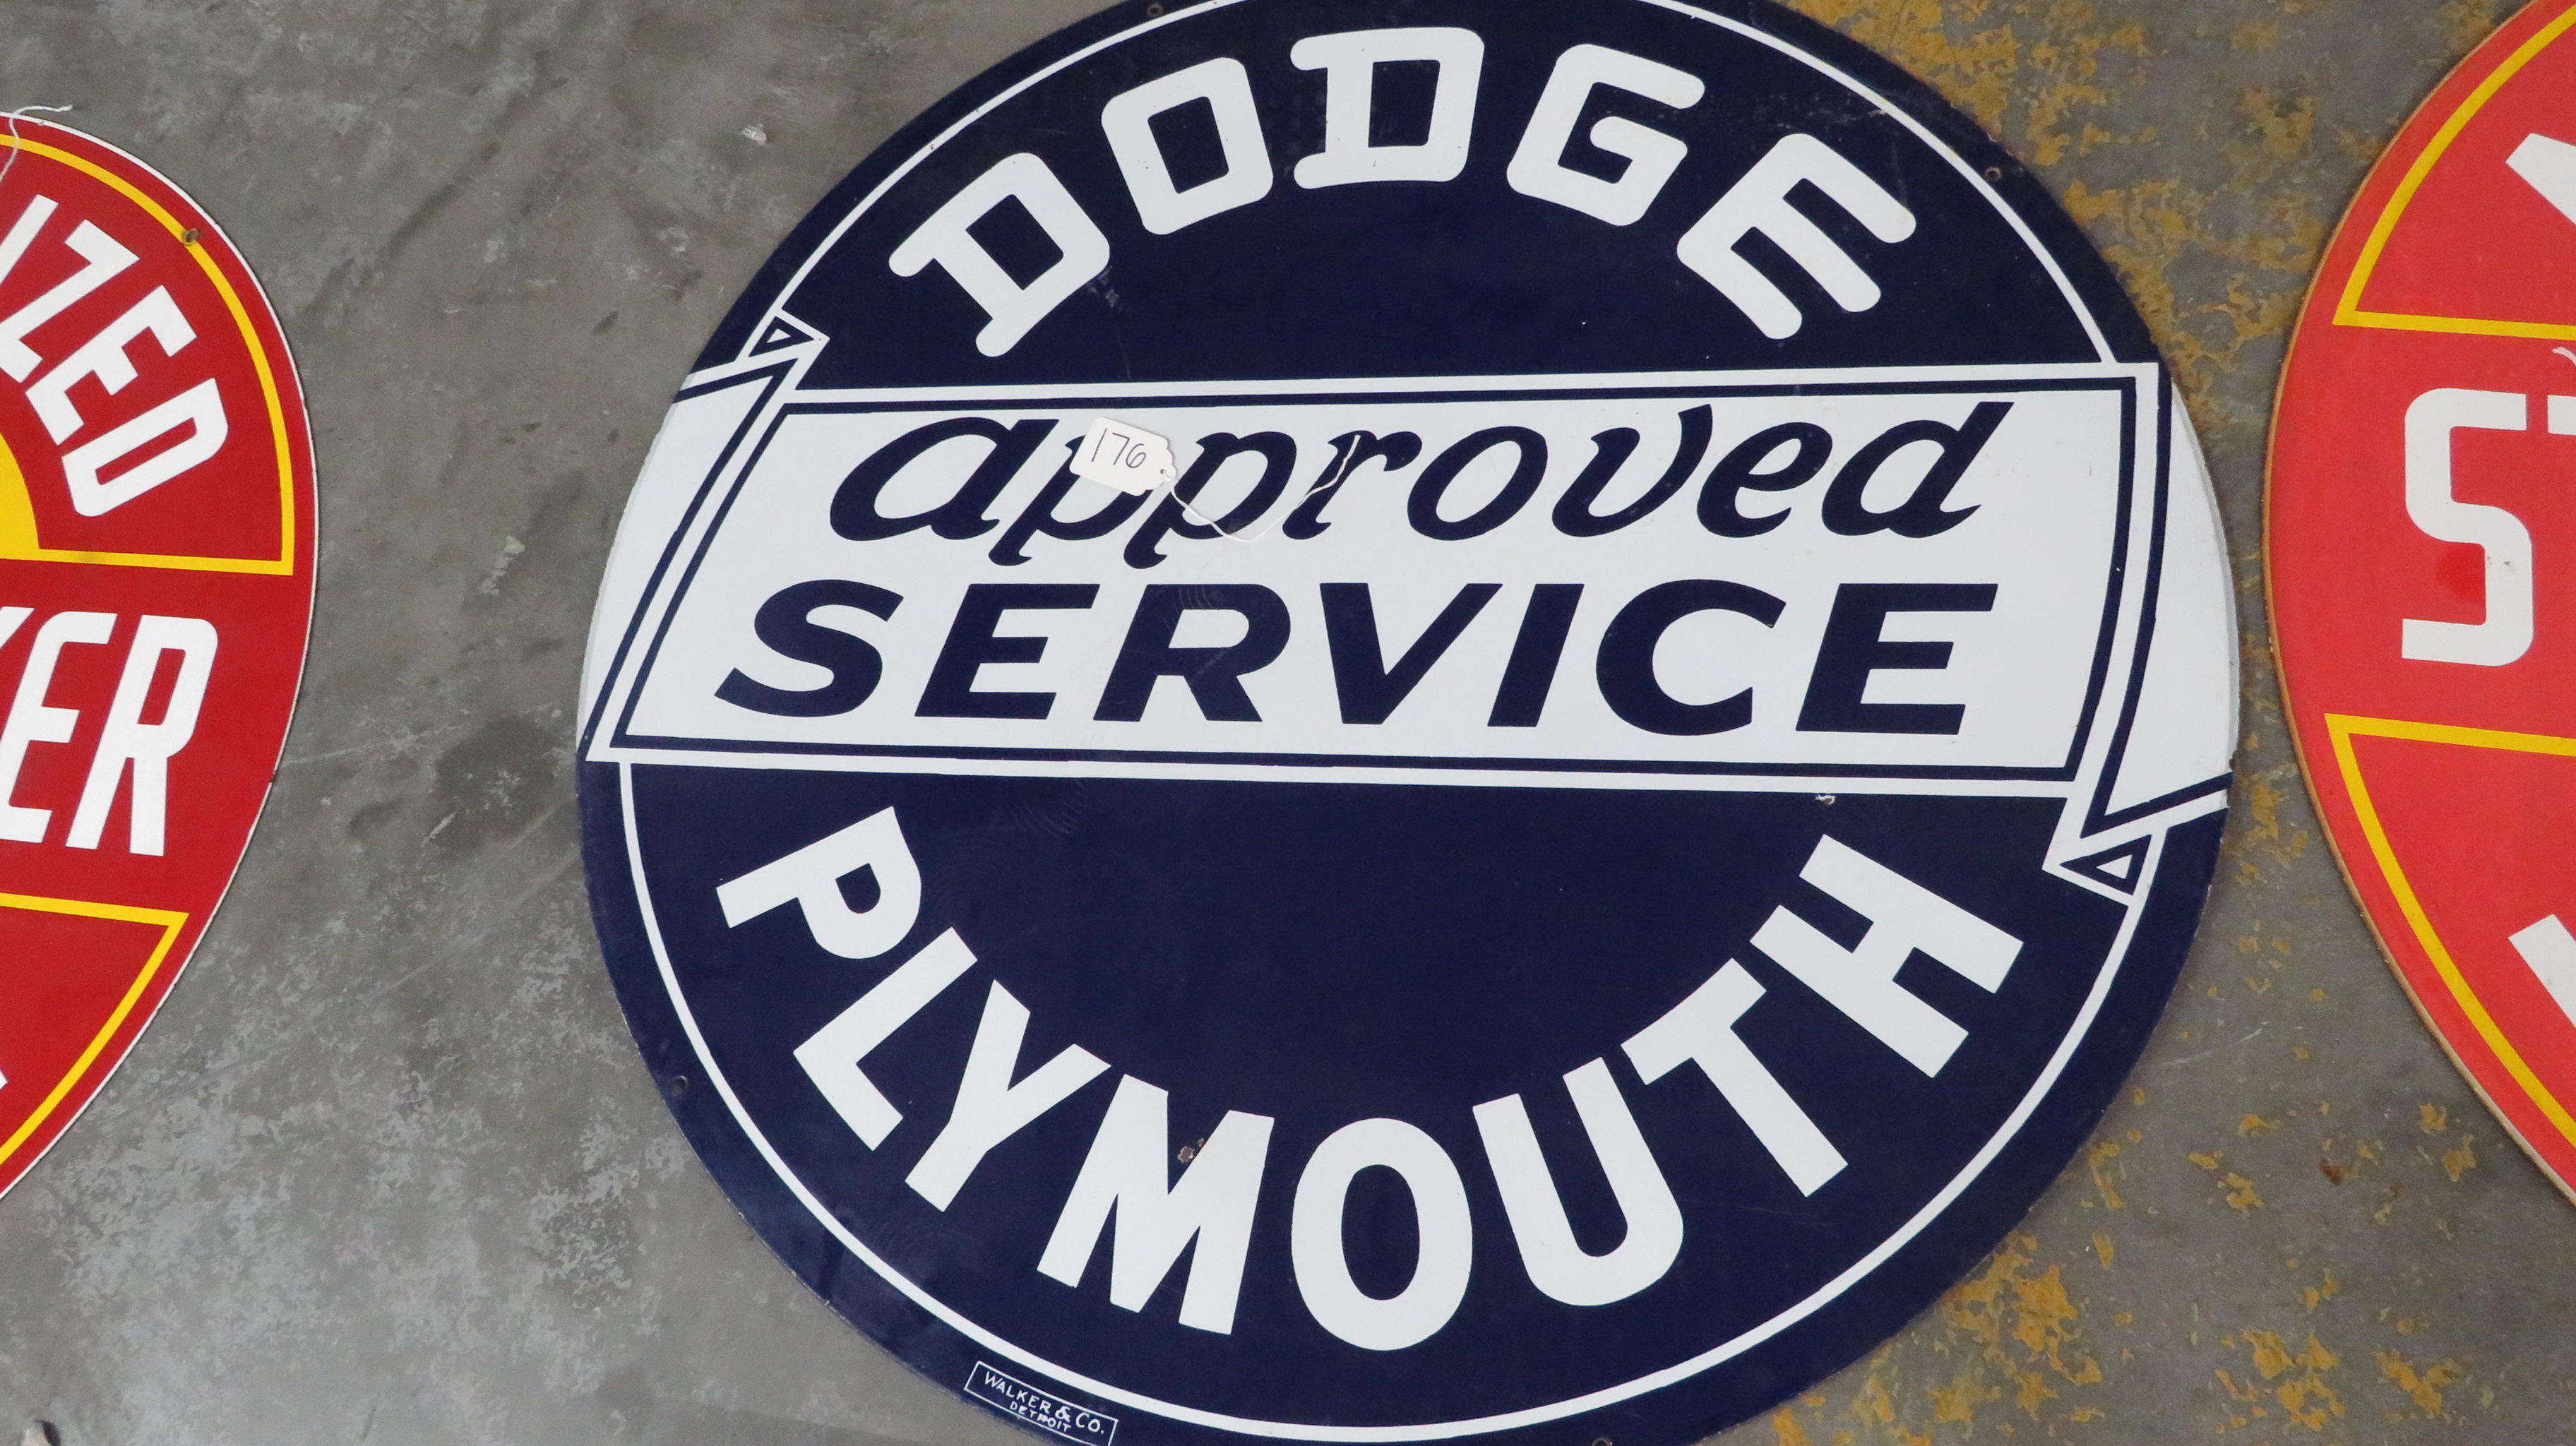 0th Image of a N/A DODGE PLYMOUTH APPROVED SERVICE